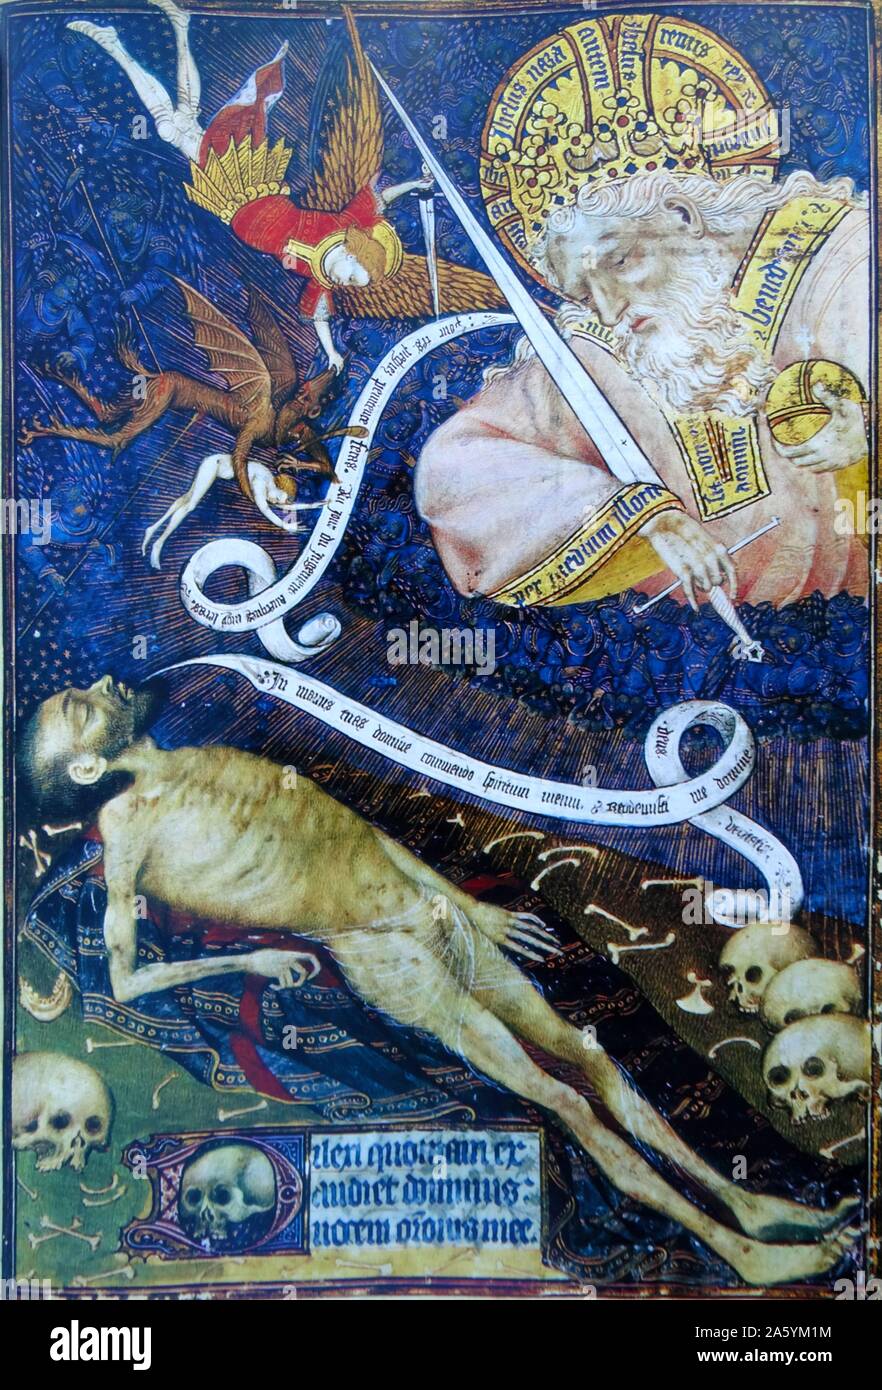 Illumination from the Rohan Book of Hours titled 'The Death before his judge'. Illumination depicts a dying man lying before God. A demon is attempting to steal the soul whilst coming under attack by St Michael the Archangel. Painted by Master de Rohan. Dated 15th Century Stock Photo